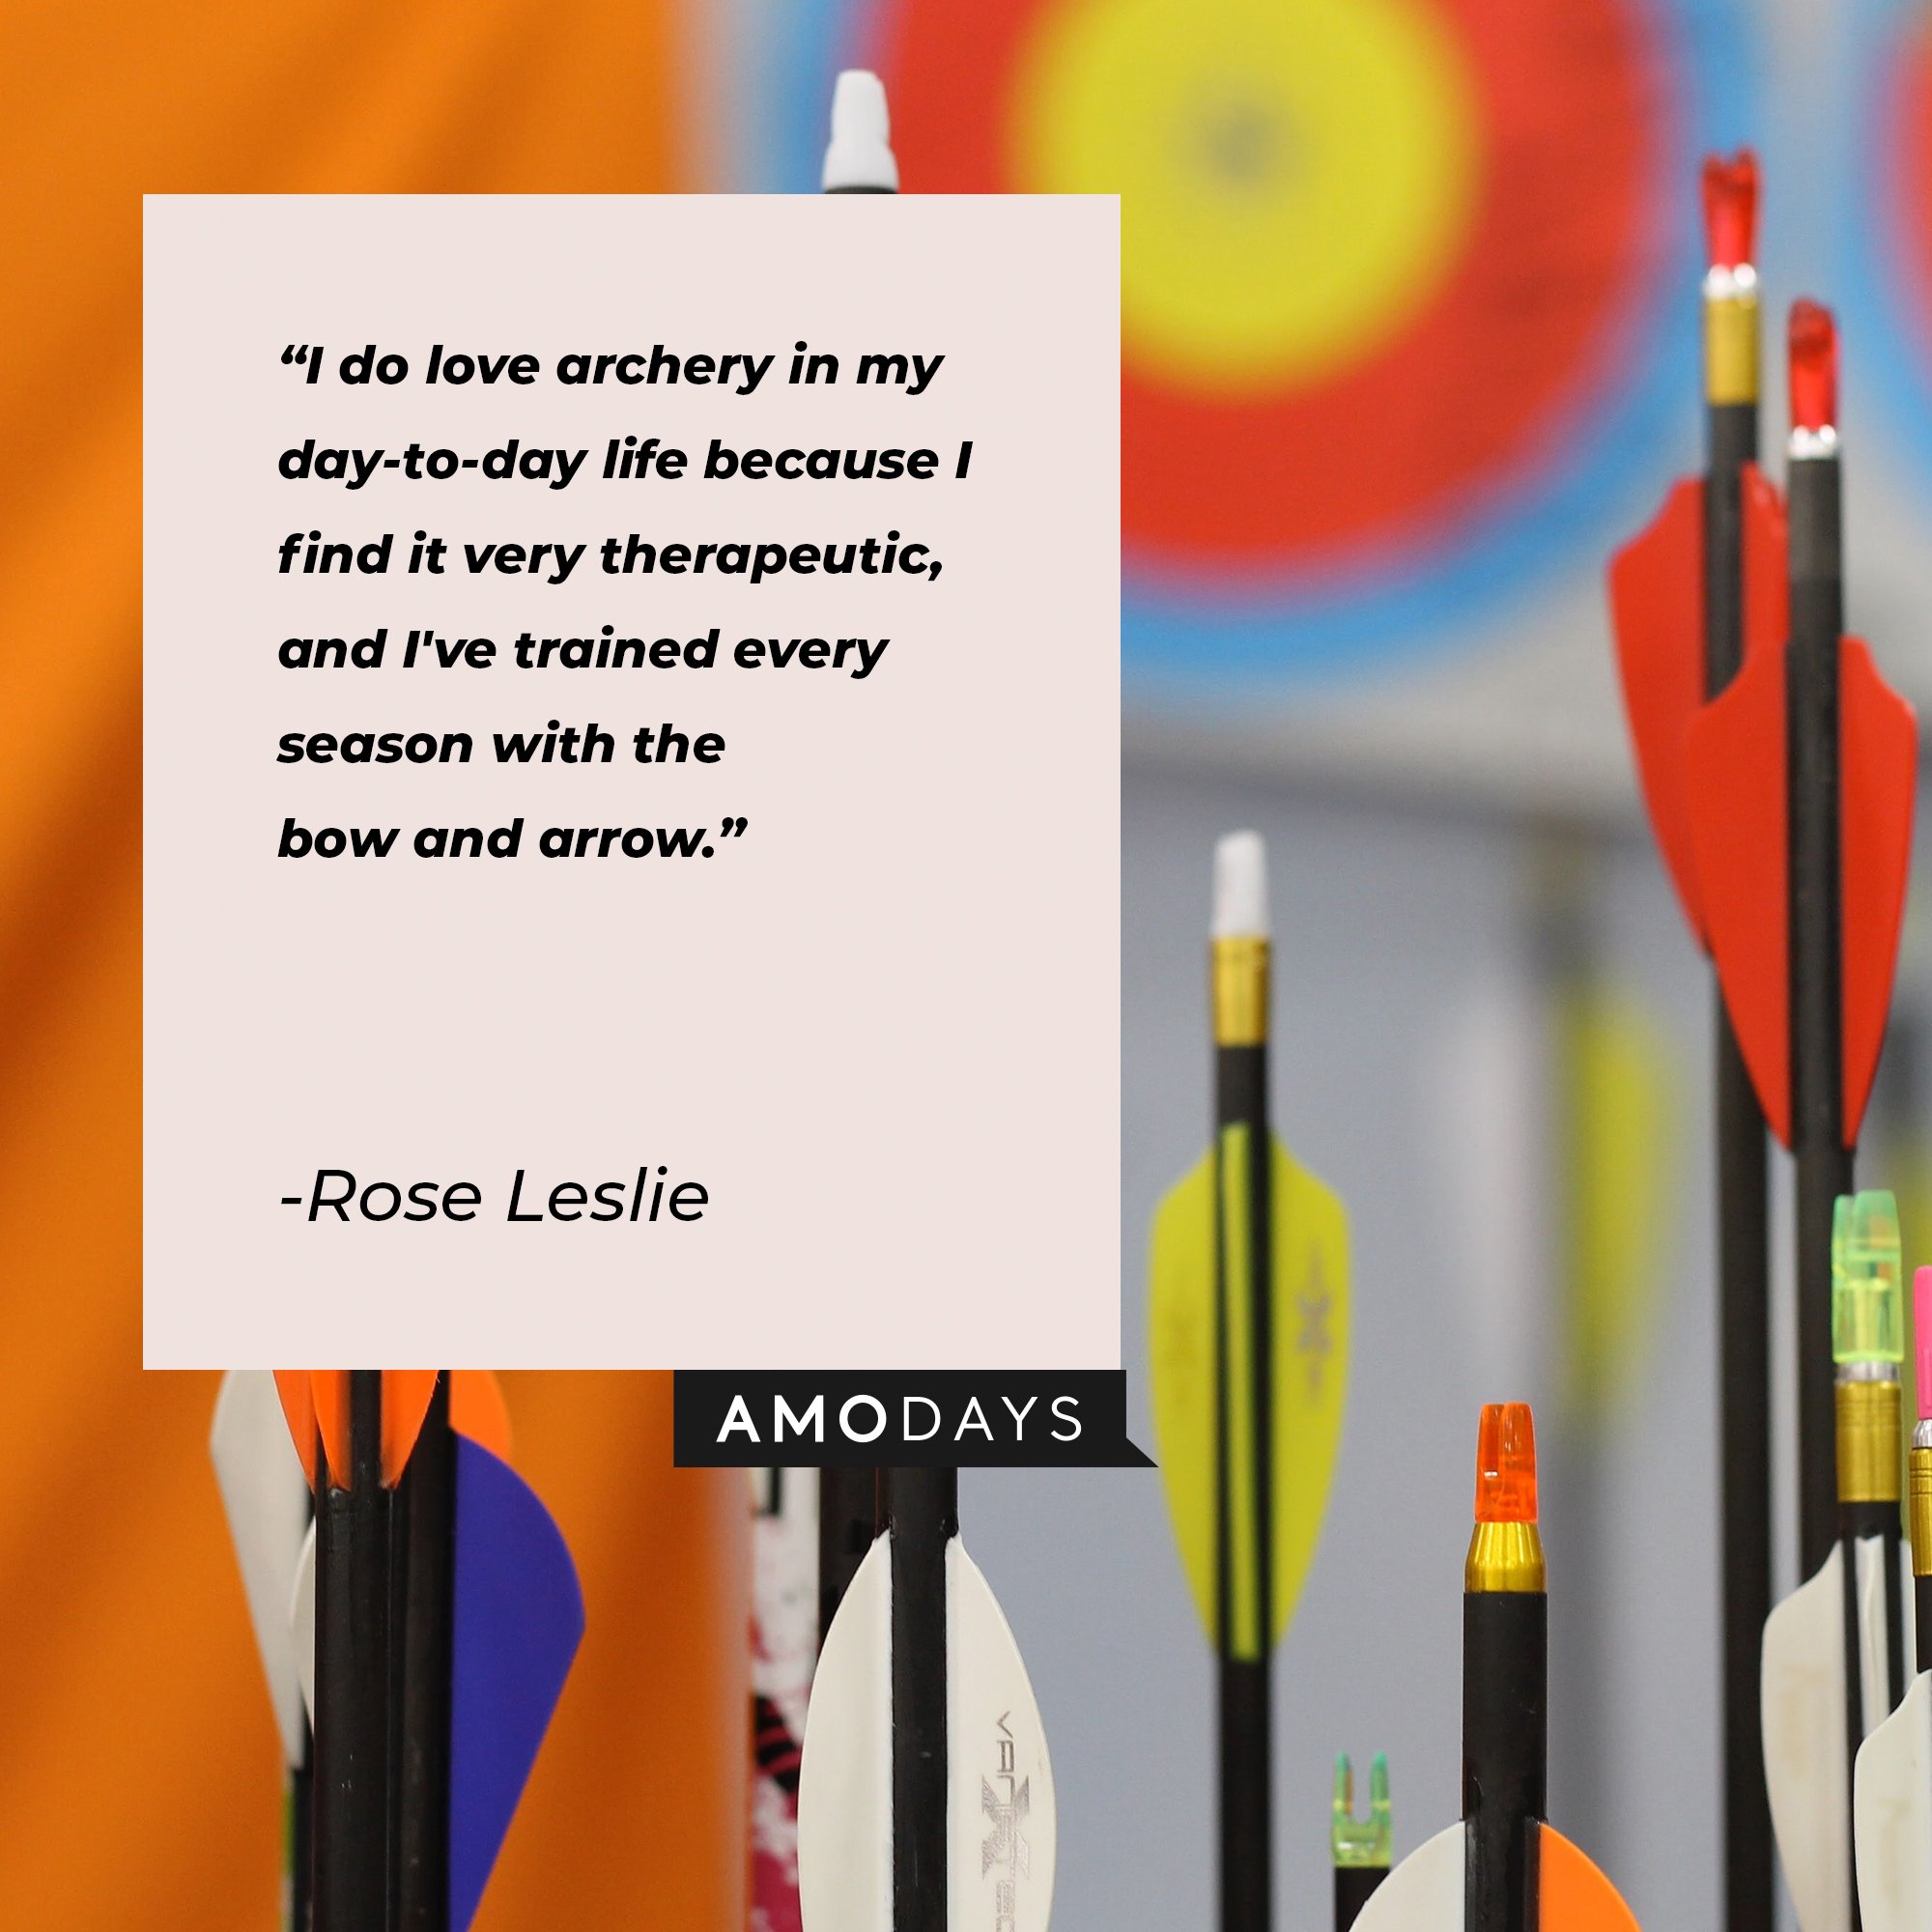 Rose Leslie’s quote: "I do love archery in my day-to-day life because I find it very therapeutic, and I've trained every season with the bow and arrow." | Image: AmoDays